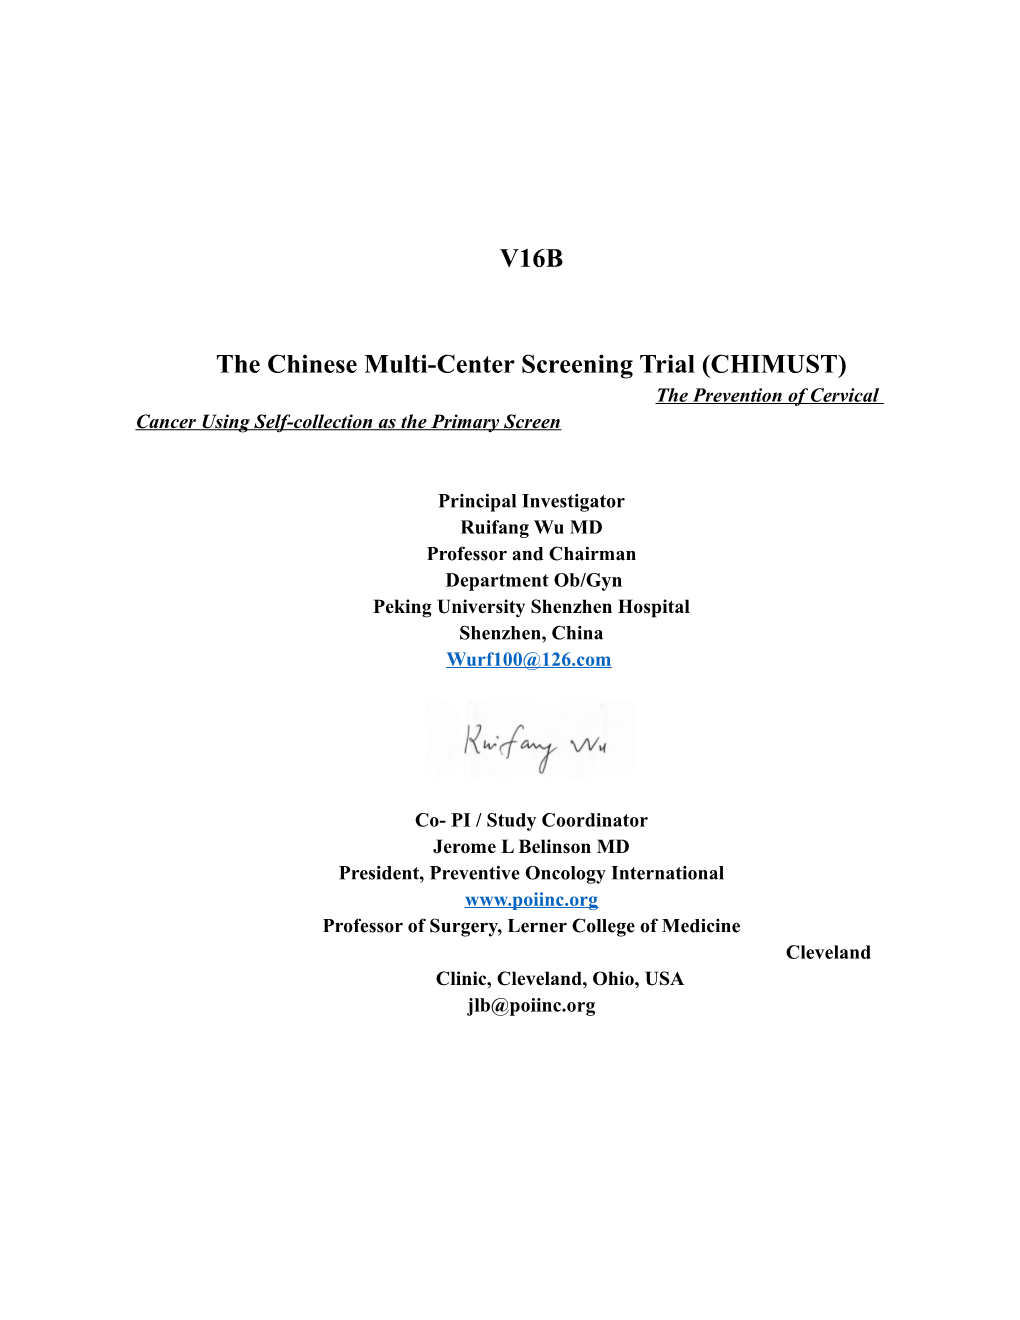 The Chinese Multi-Center Screening Trial (CHIMUST)